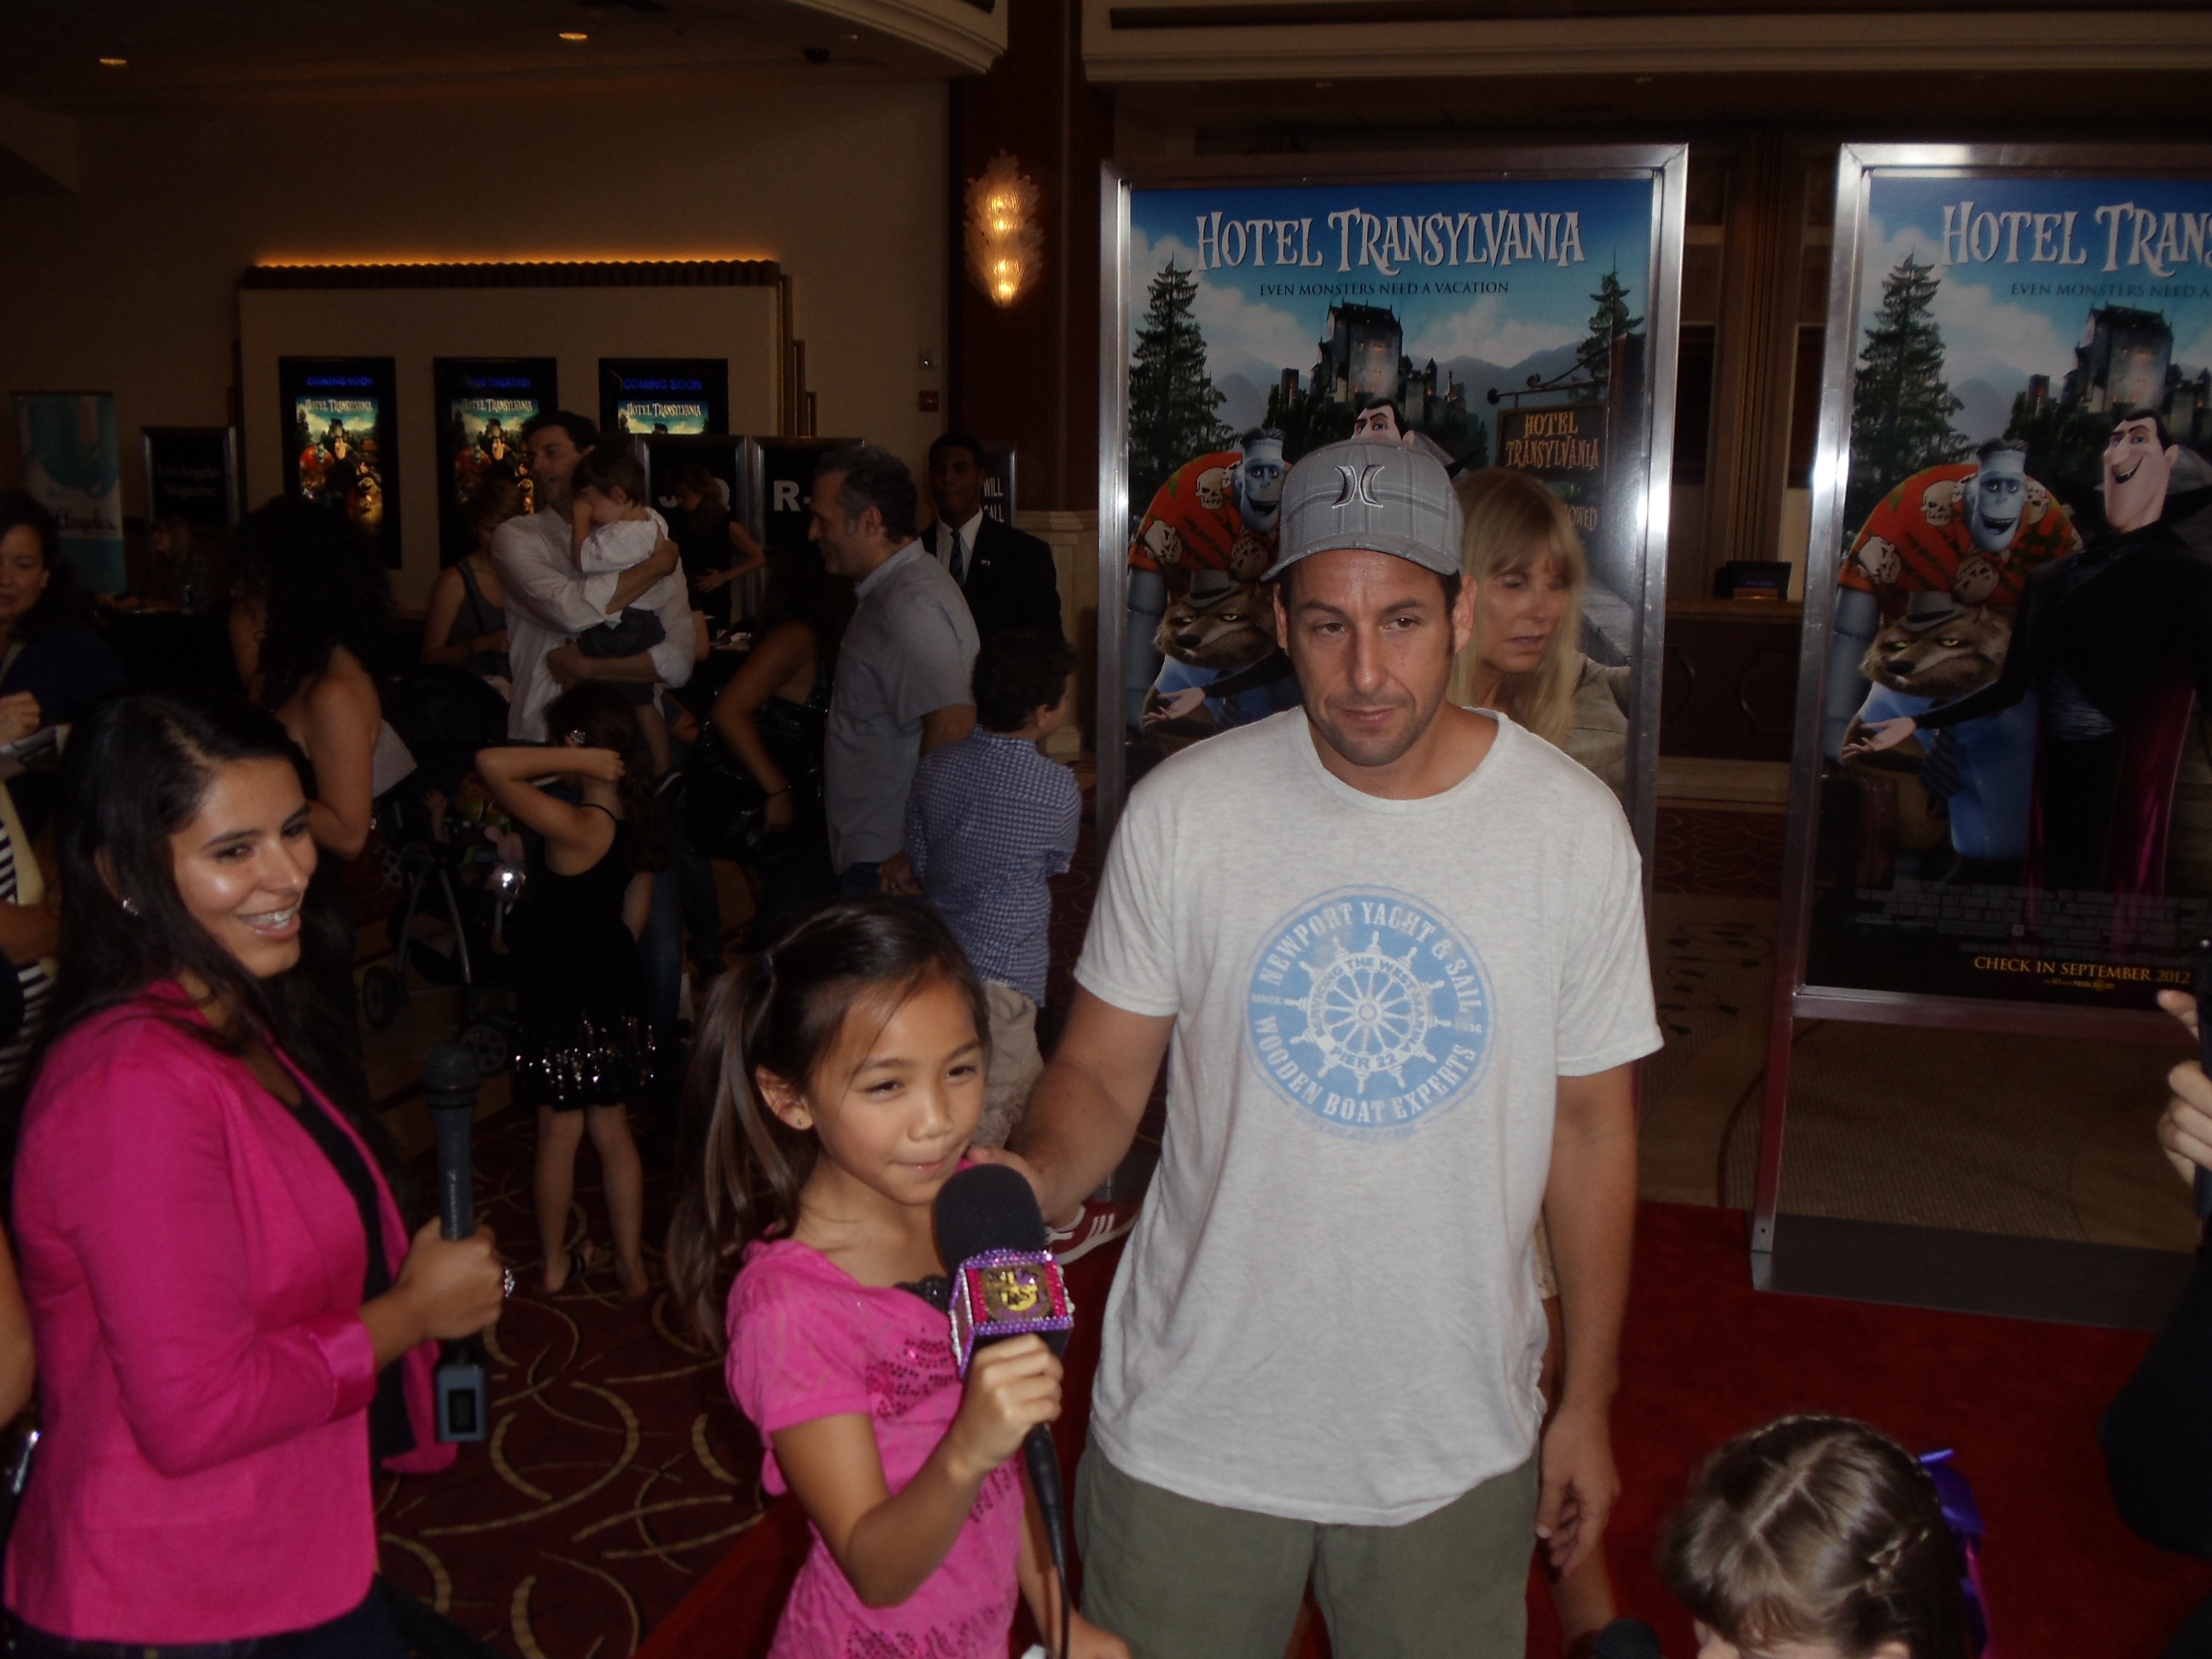 Cheyenne Nguyen Red Carpet interview with Adam Sandlers for Hotel Transylvania